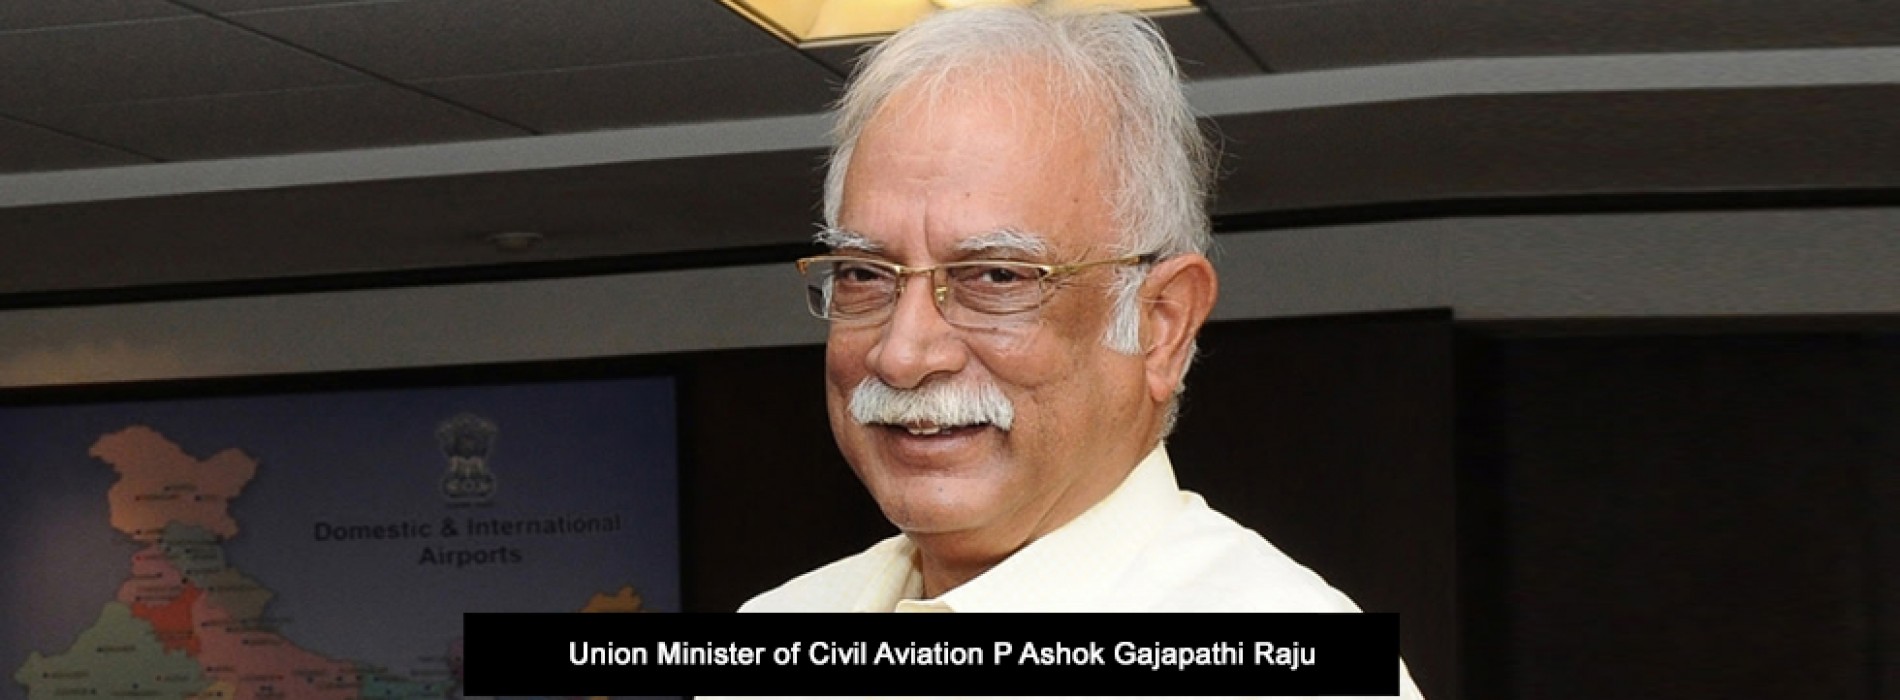 India is the third largest in air passenger traffic says Minister